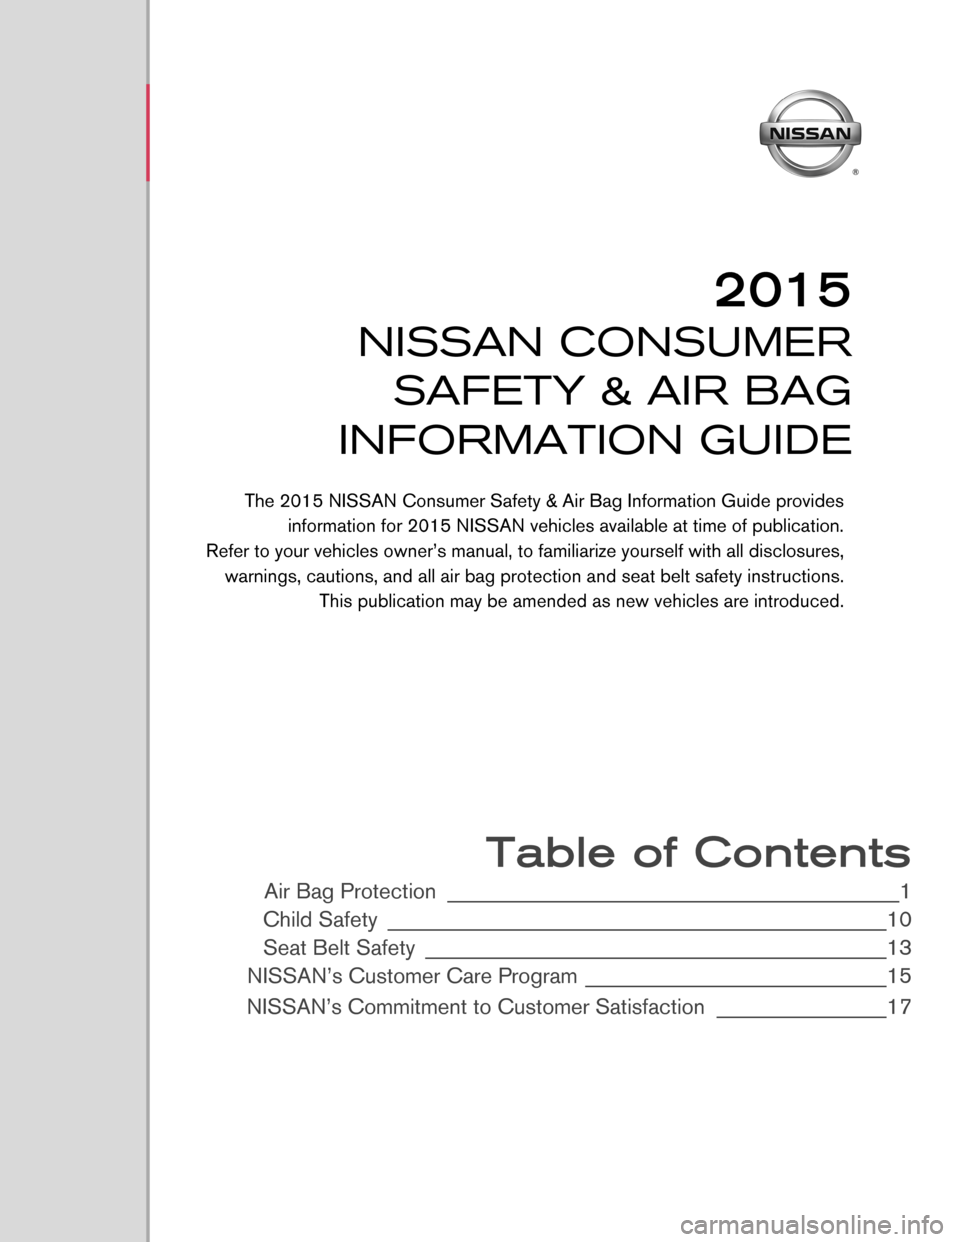 NISSAN MURANO 2015 3.G Consumer Safety Air Bag Information Guide  
 
 
 
 
 
 
 
 
 
 
 
 
 
 
 
 
 
 
 
 
 
 
 Table of Contents 
Air Bag Protection __________________\d__________________\d____________1 
Child \fafety _________________________\d__________________\